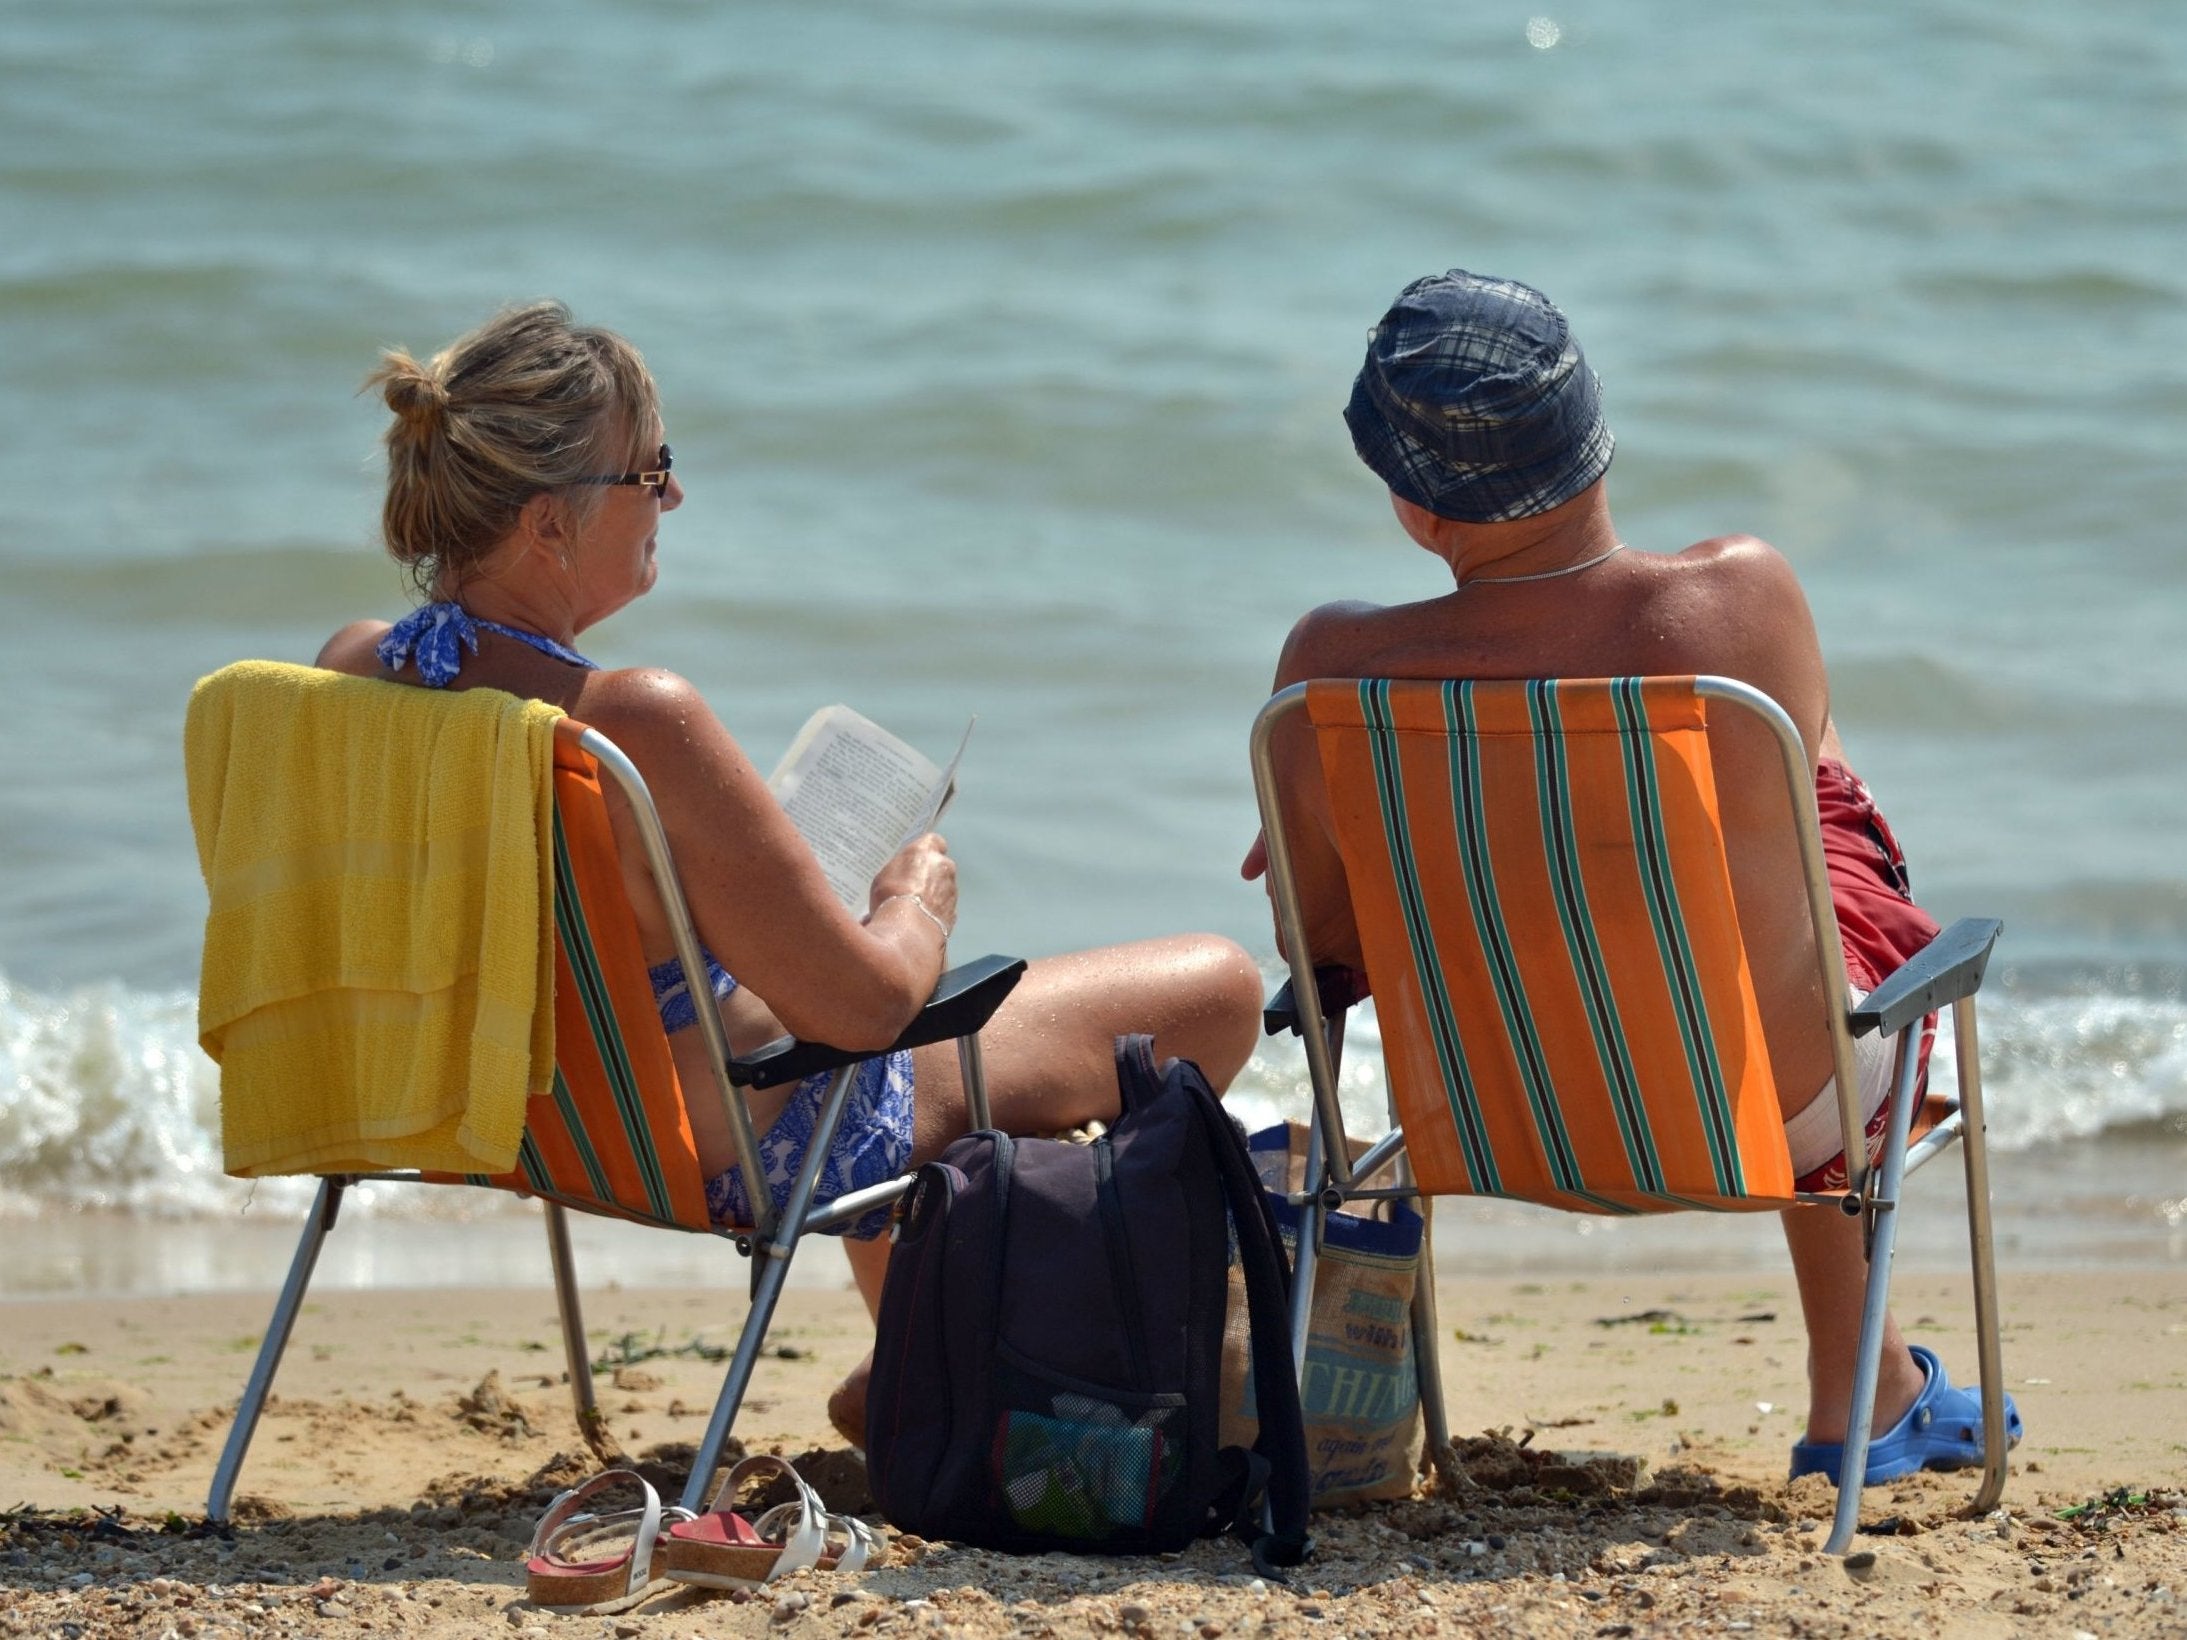 Sit on your deckchair and think about the scientific implications of this lovely weather